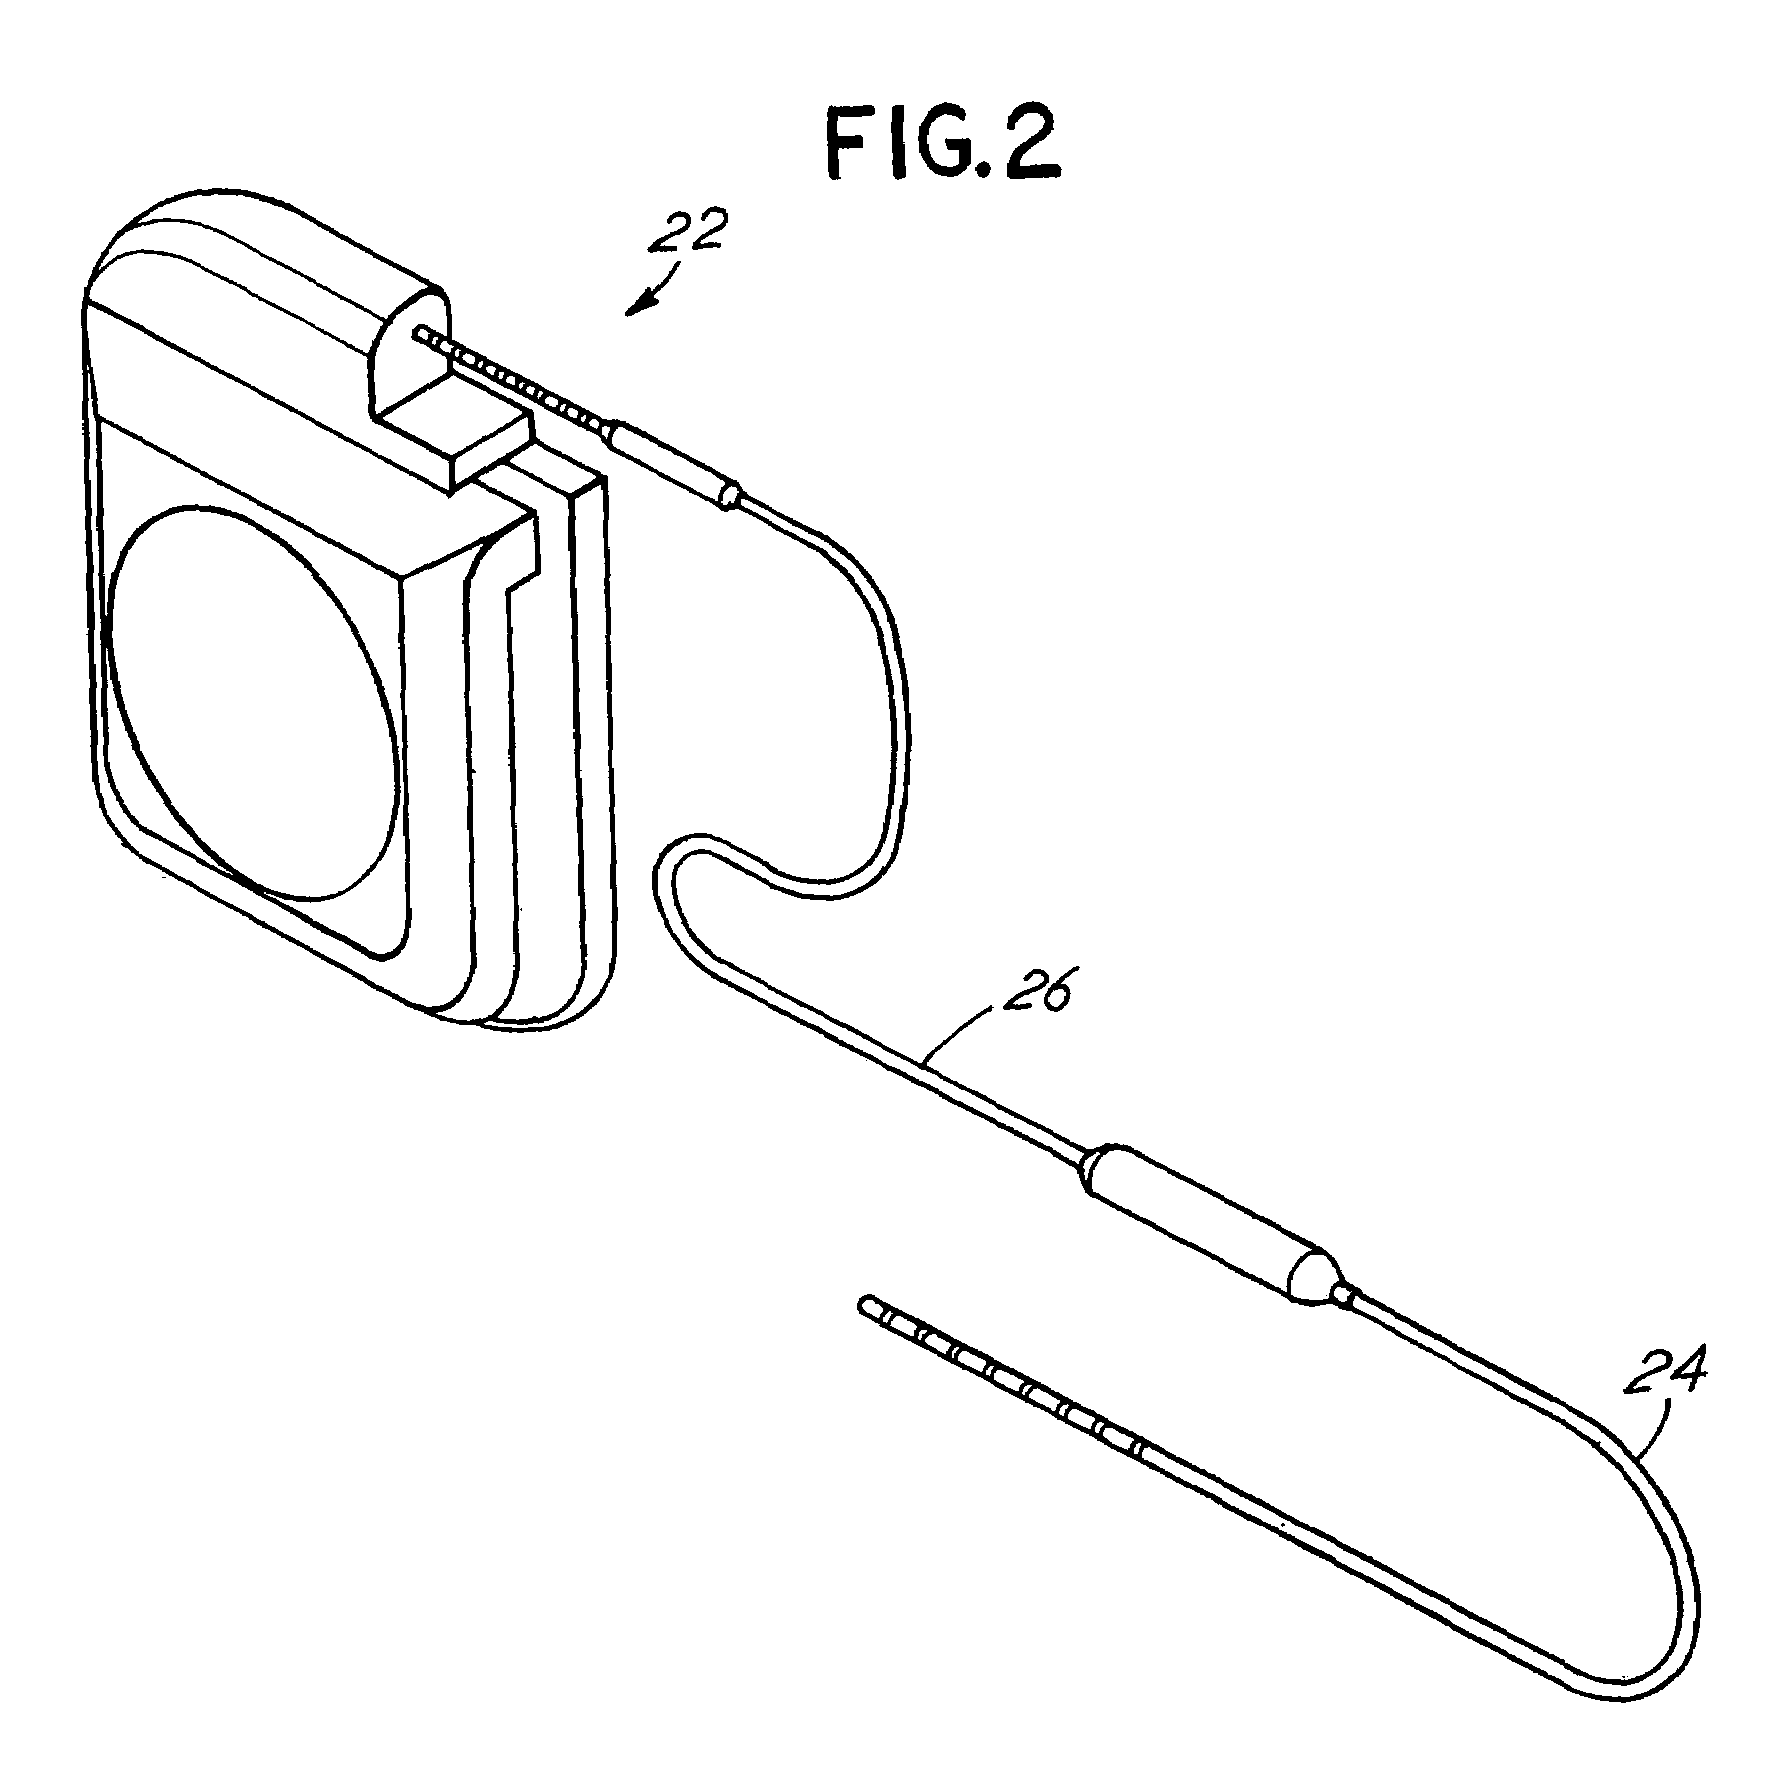 Method of operating an implantable medical device telemetry processor